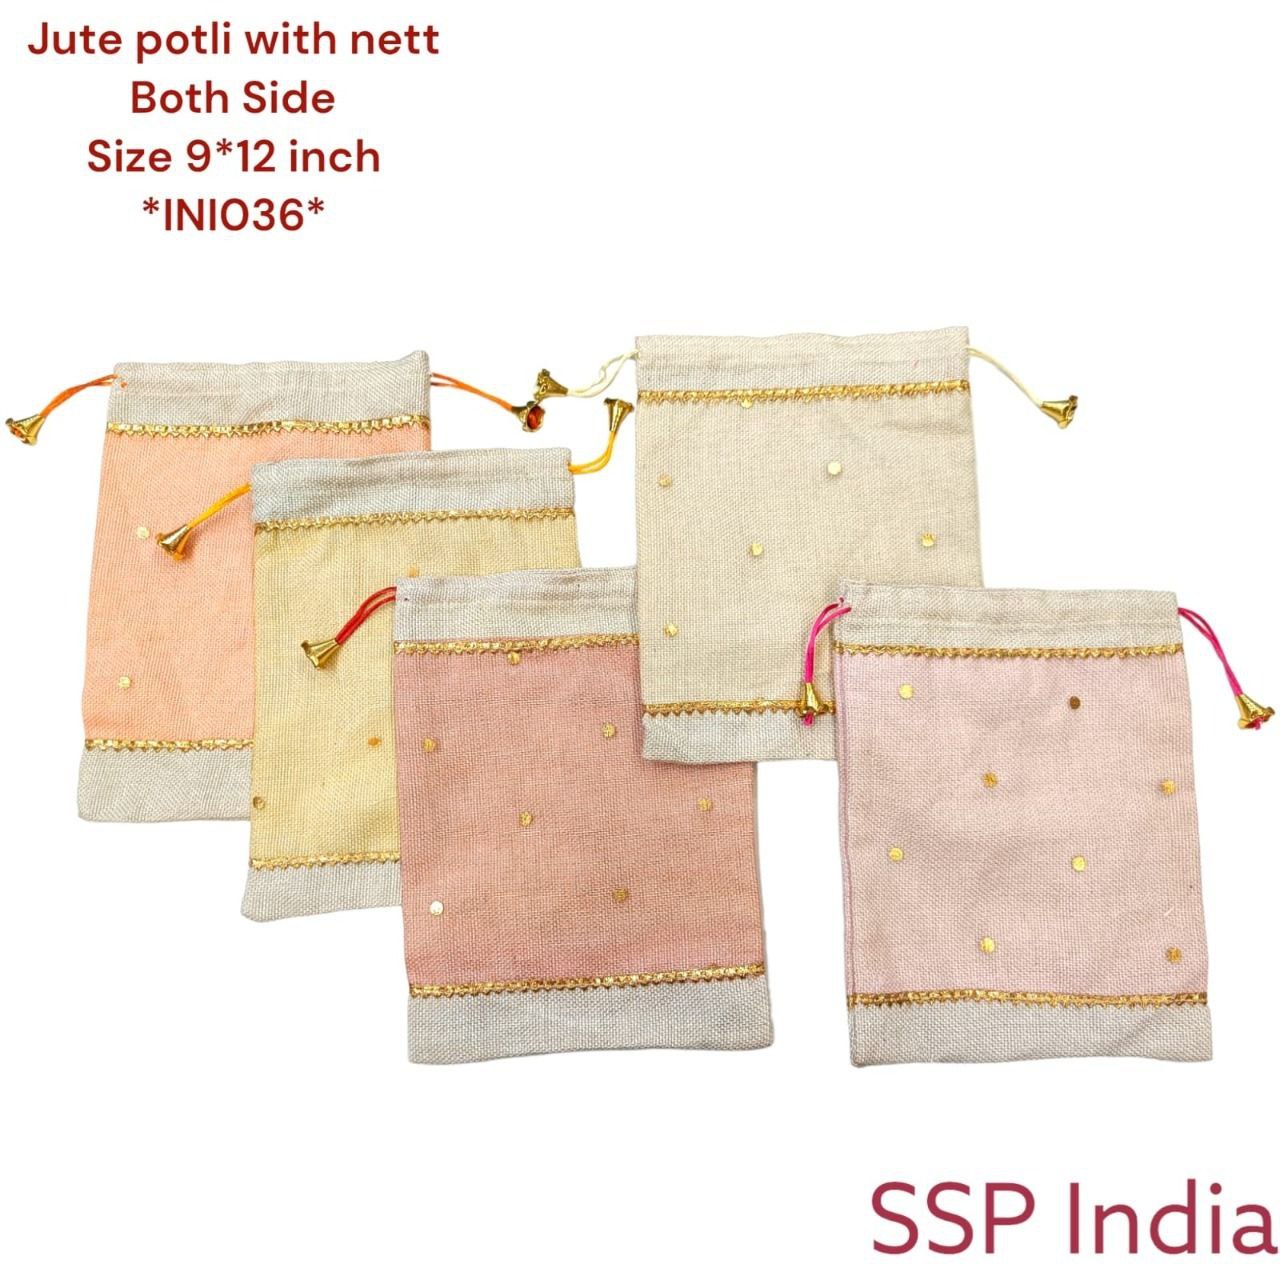 Buy JUTE POTLI WITH POLKA NETTBOTH SIDE (36 pieces),OR, SSP | KCPC